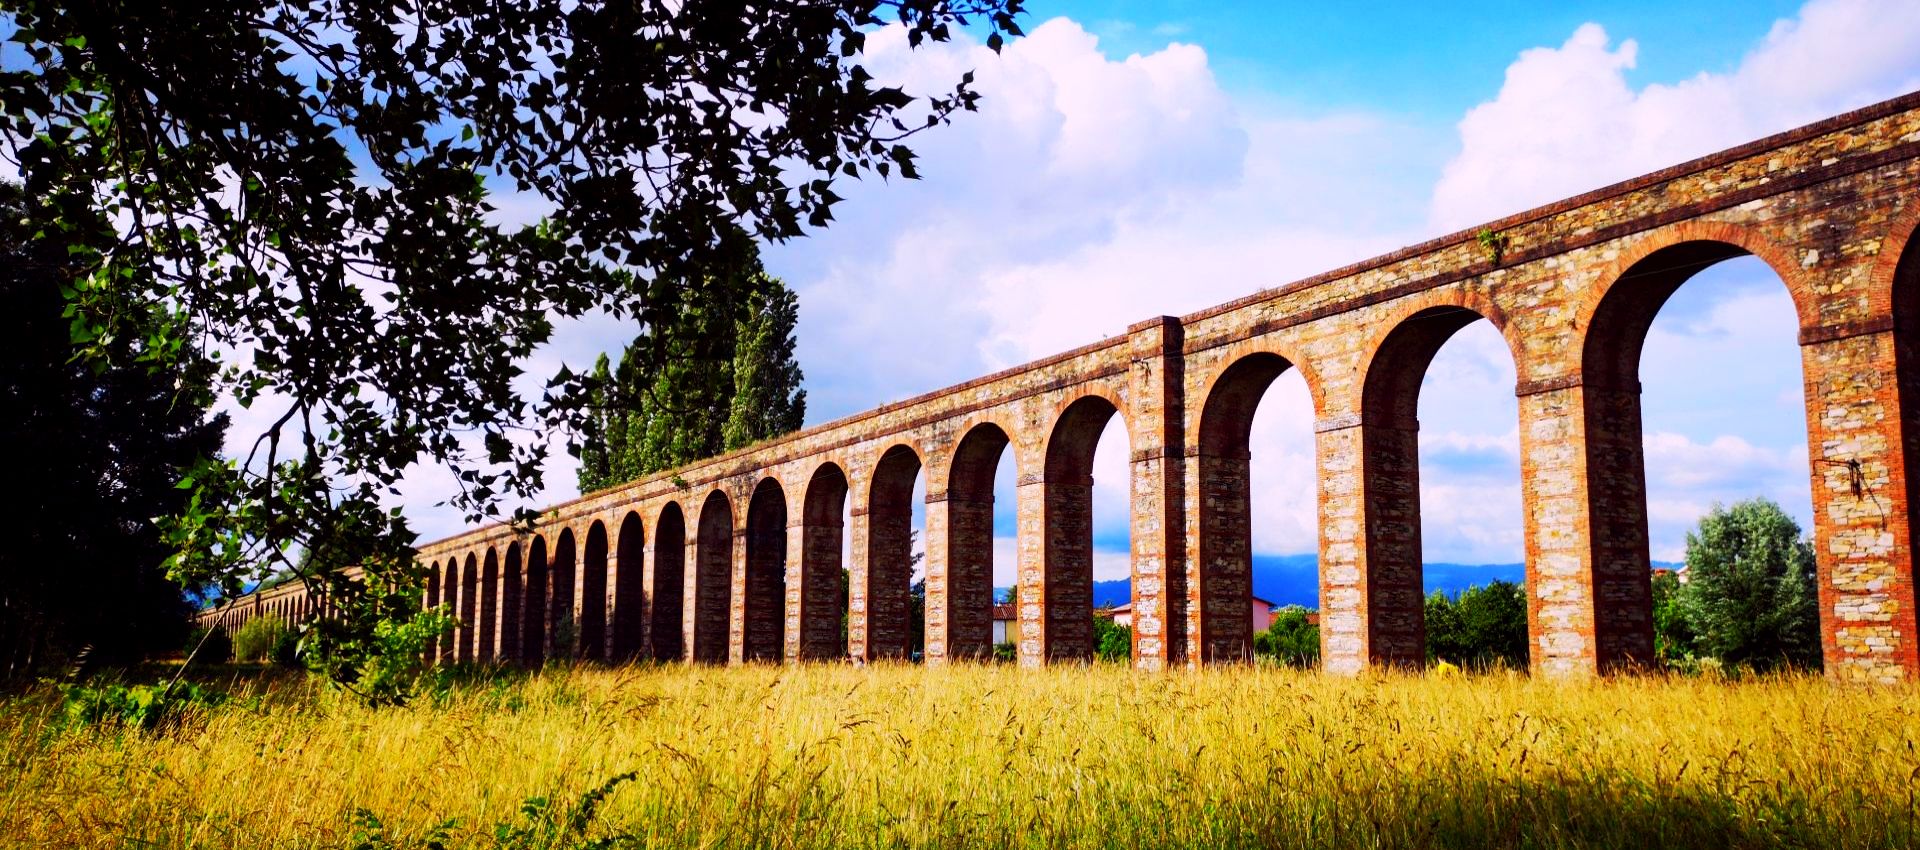 countryside near the nottolini aqueduct in lucca